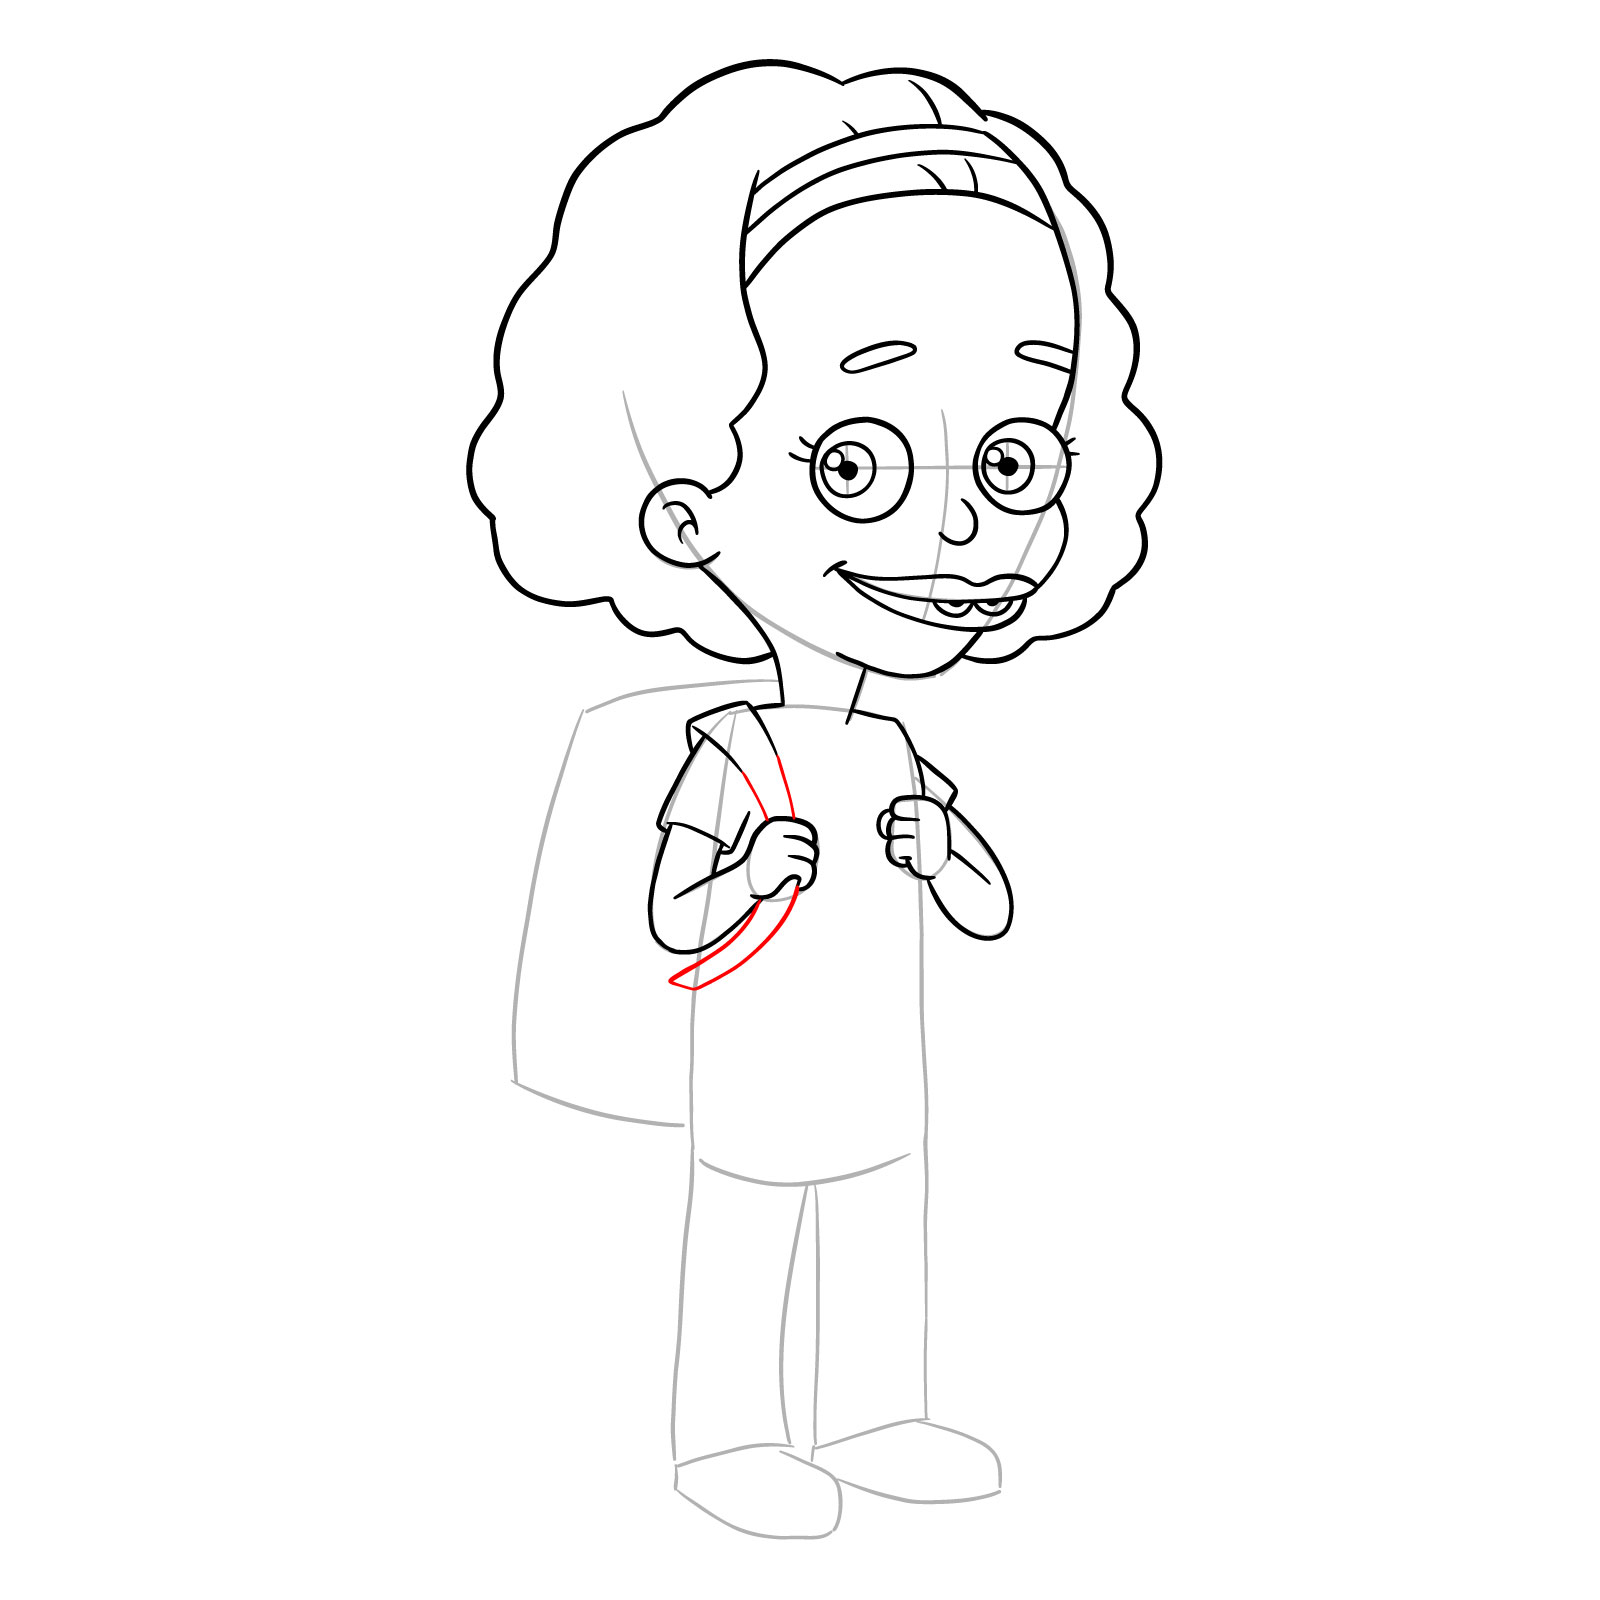 How to draw Missy from Big Mouth - step 18